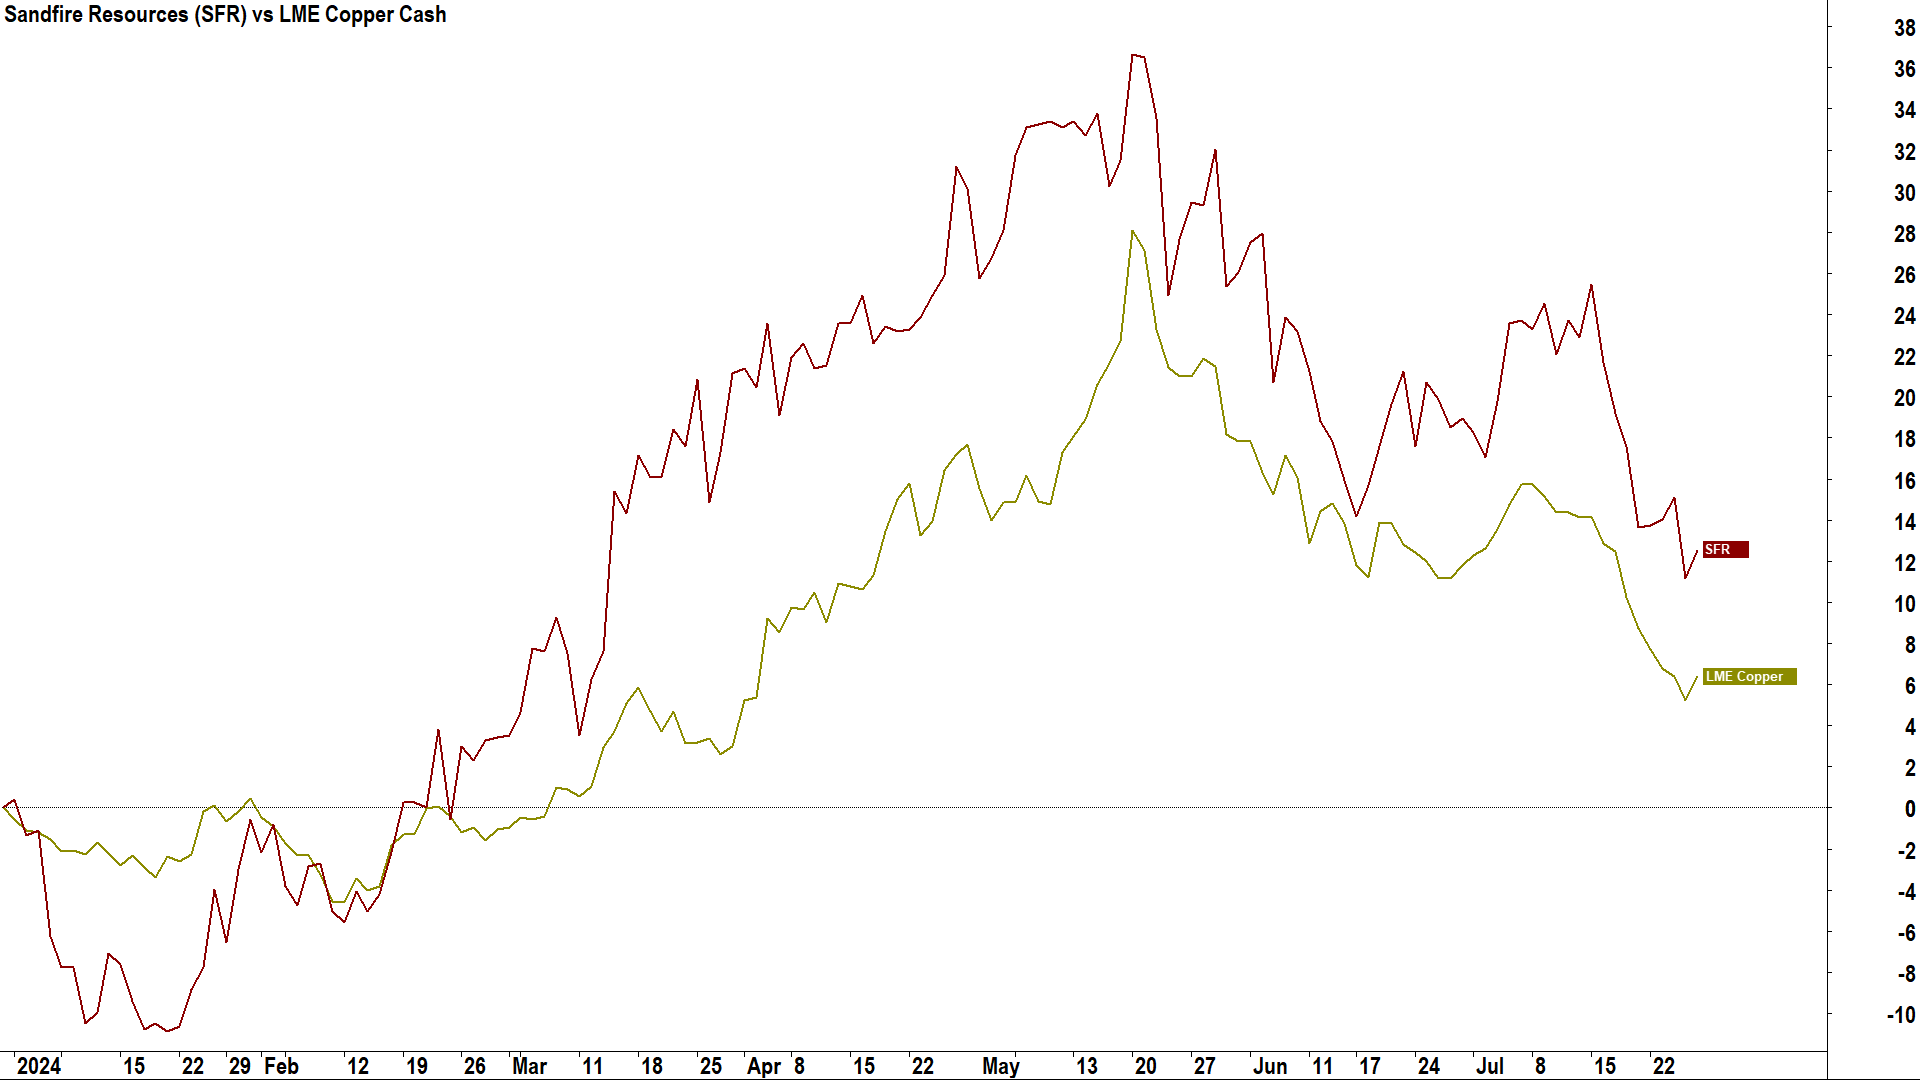 Sandfire Resources (SFR) vs London Metals Exchange Copper Cash price in percentage terms since January 1, 2024.